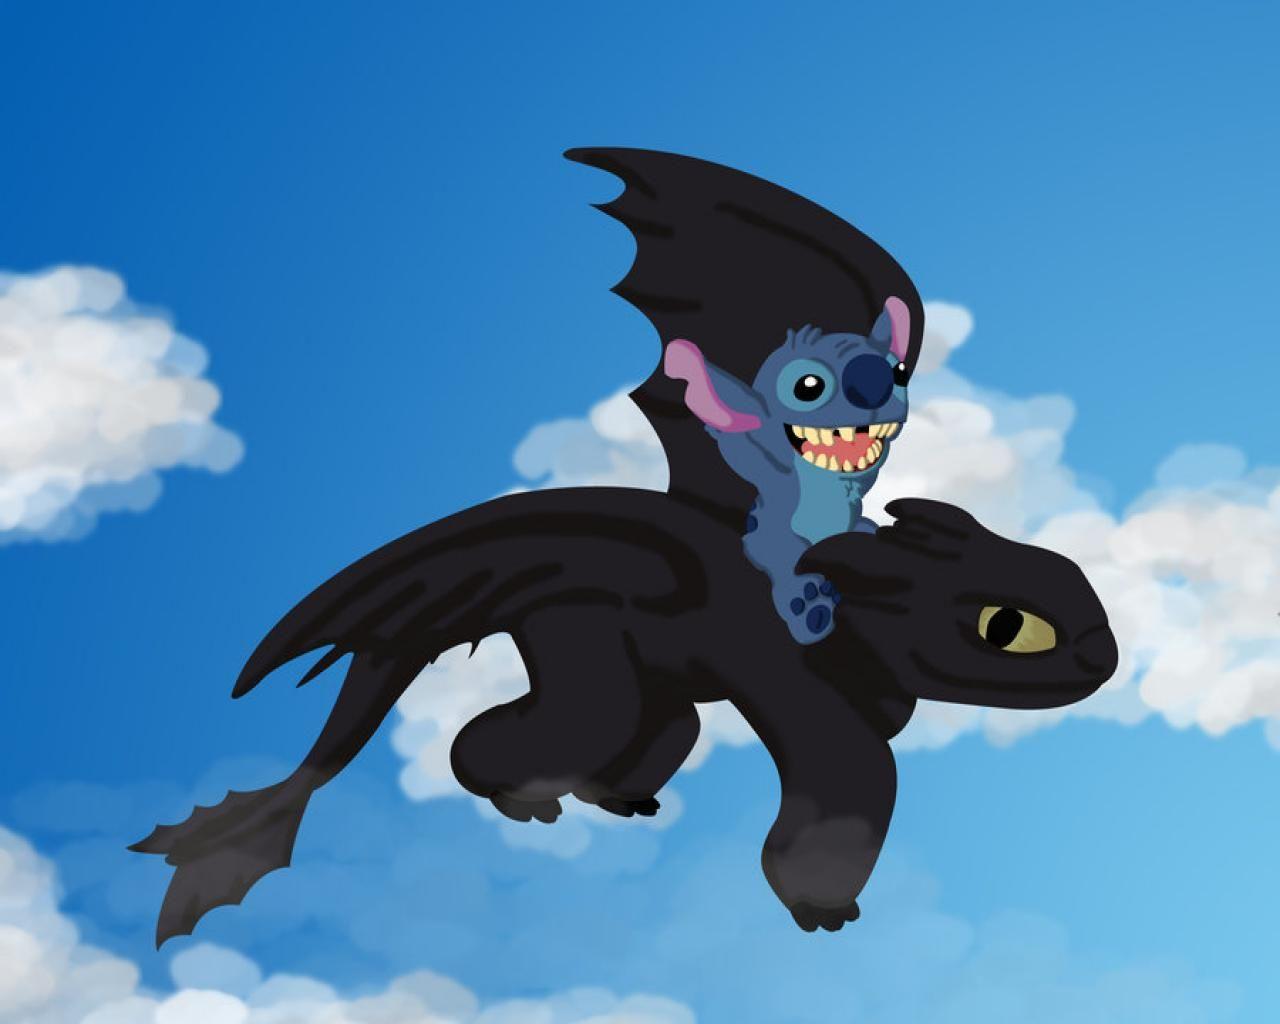 Toothless And Stitch Wallpaper #EYXS7TI, 59.79 Kb